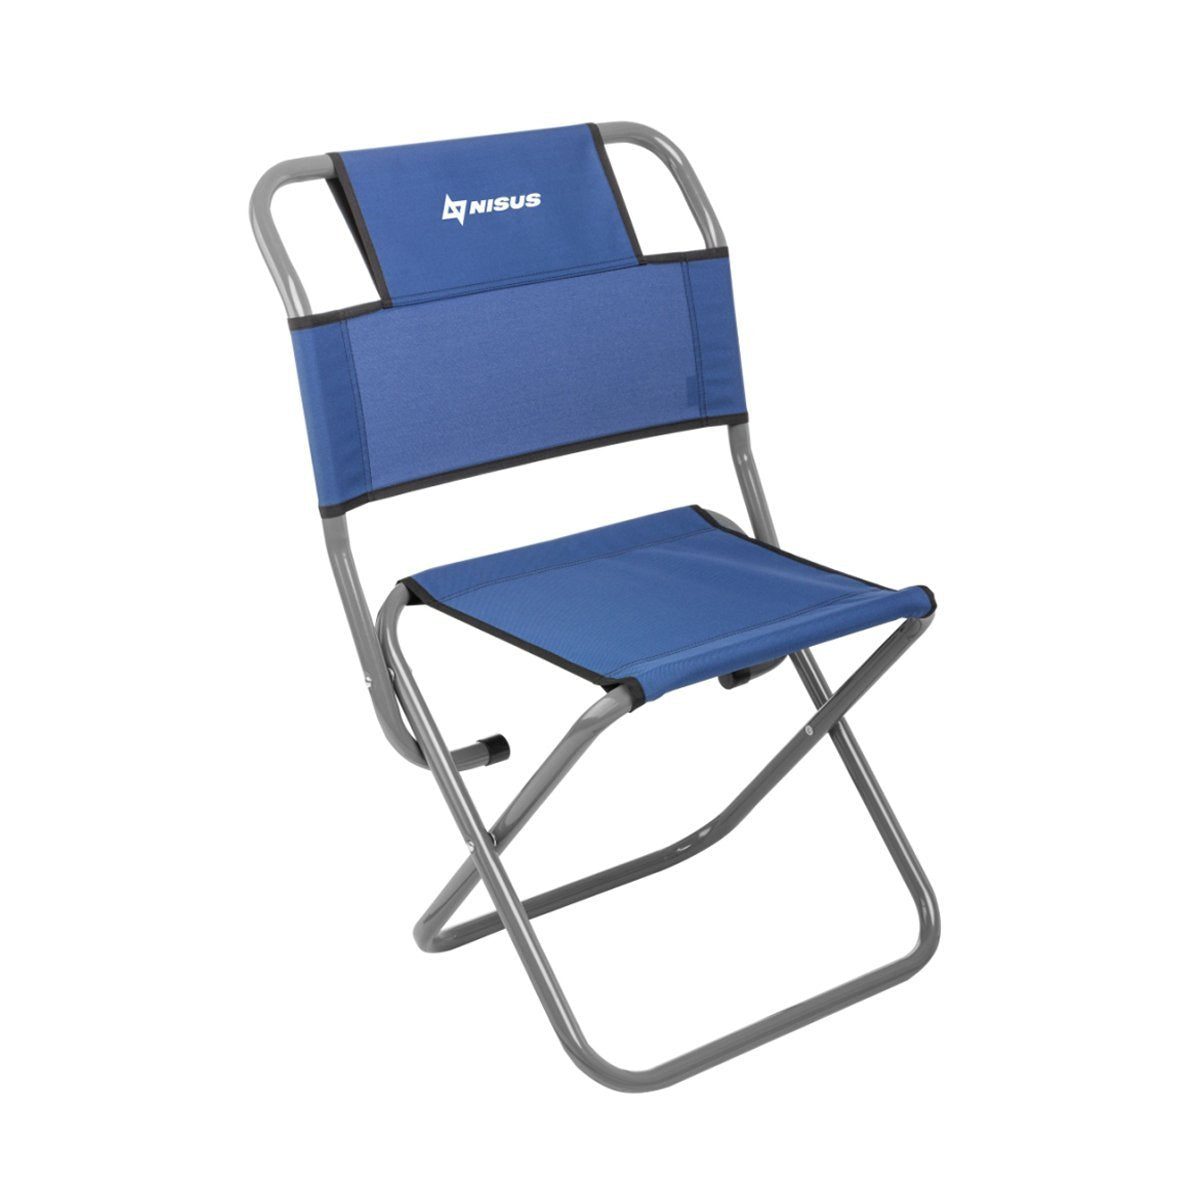 Nisus blue folding camping chair with a back